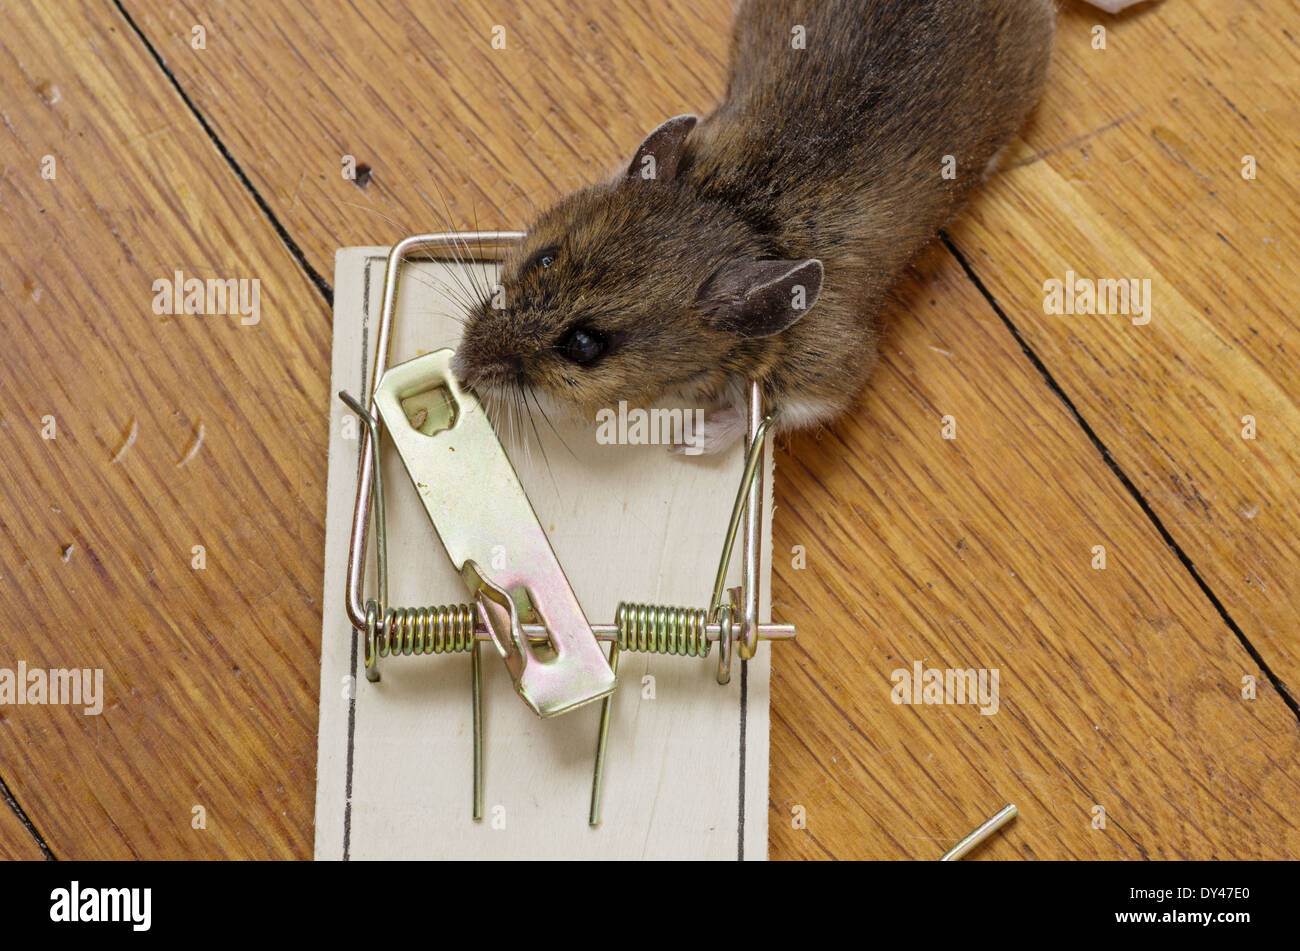 mousetrap with dead mouse on a wooden floor Stock Photo